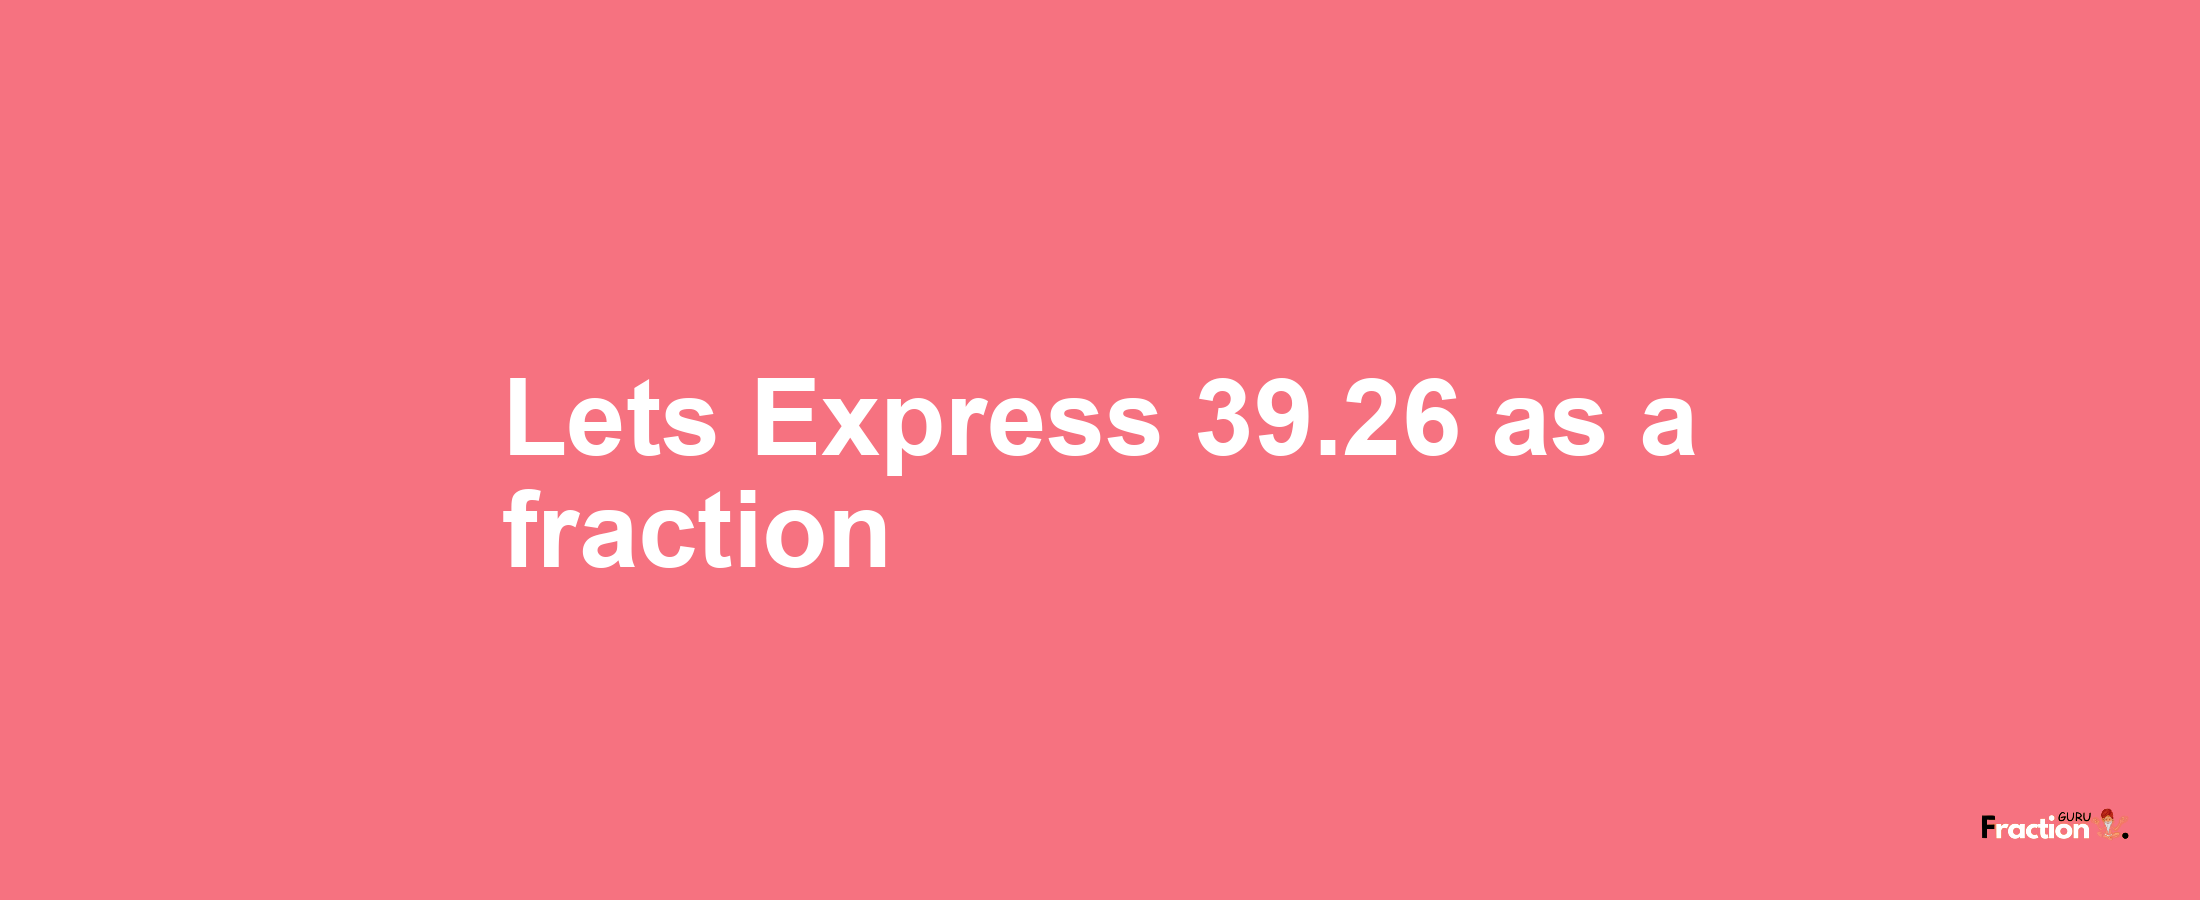 Lets Express 39.26 as afraction